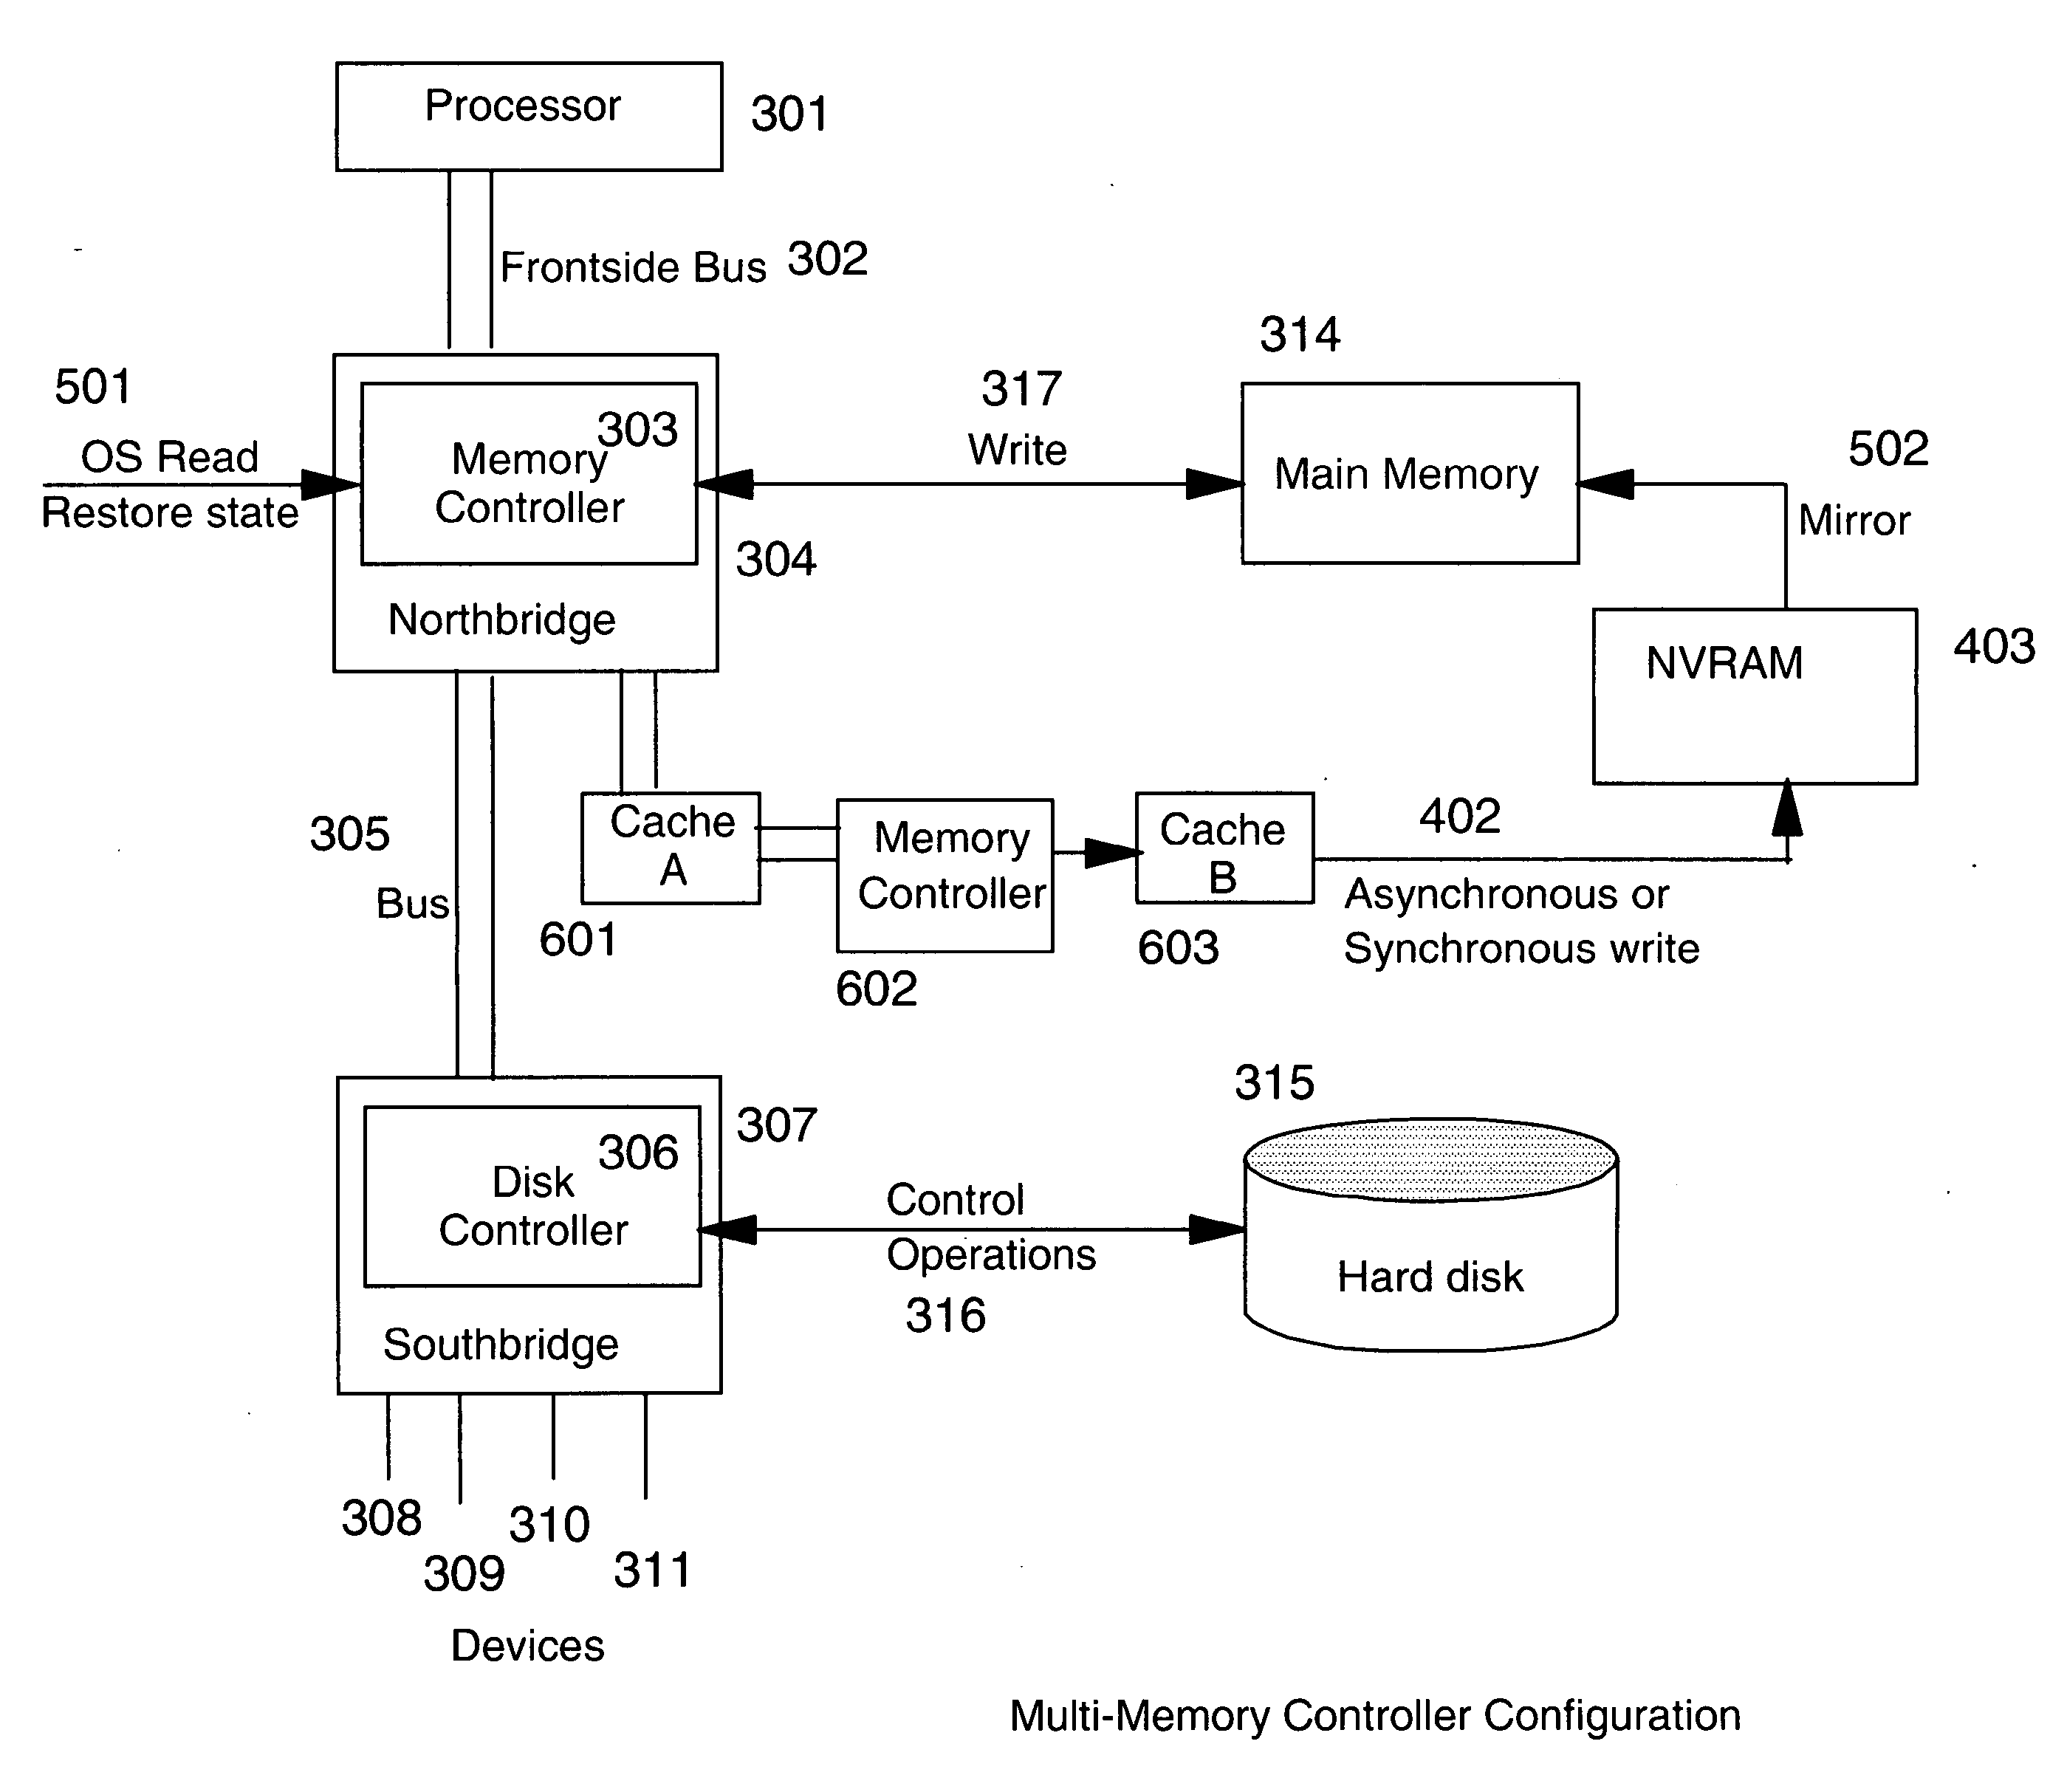 Mirroring System Memory In Non-Volatile Random Access Memory (NVRAM) For Fast Power On/Off Cycling